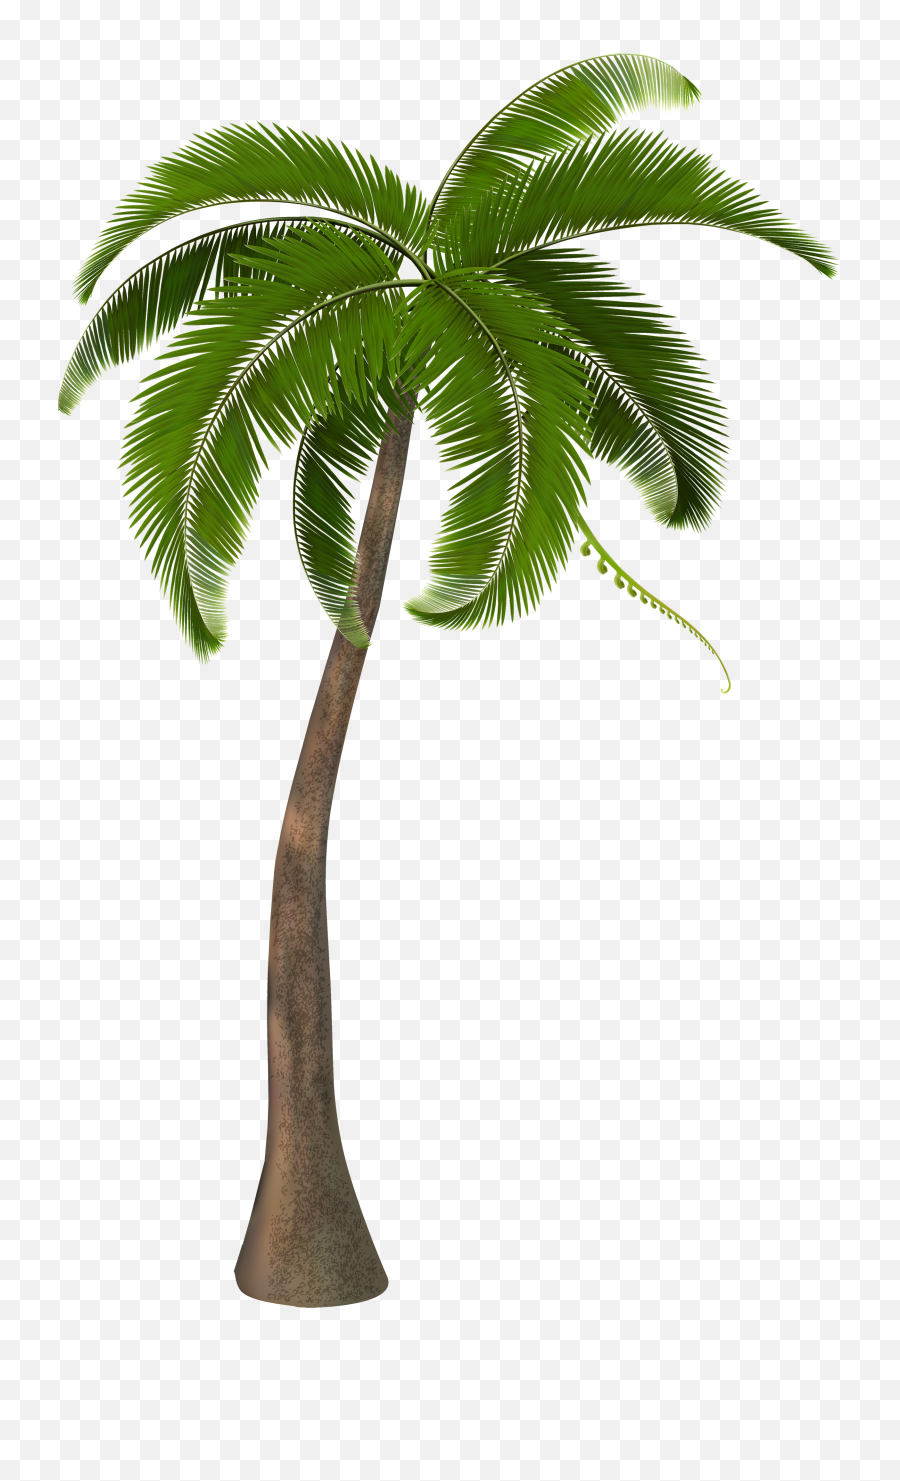 Palm Tree Png Clipart Image